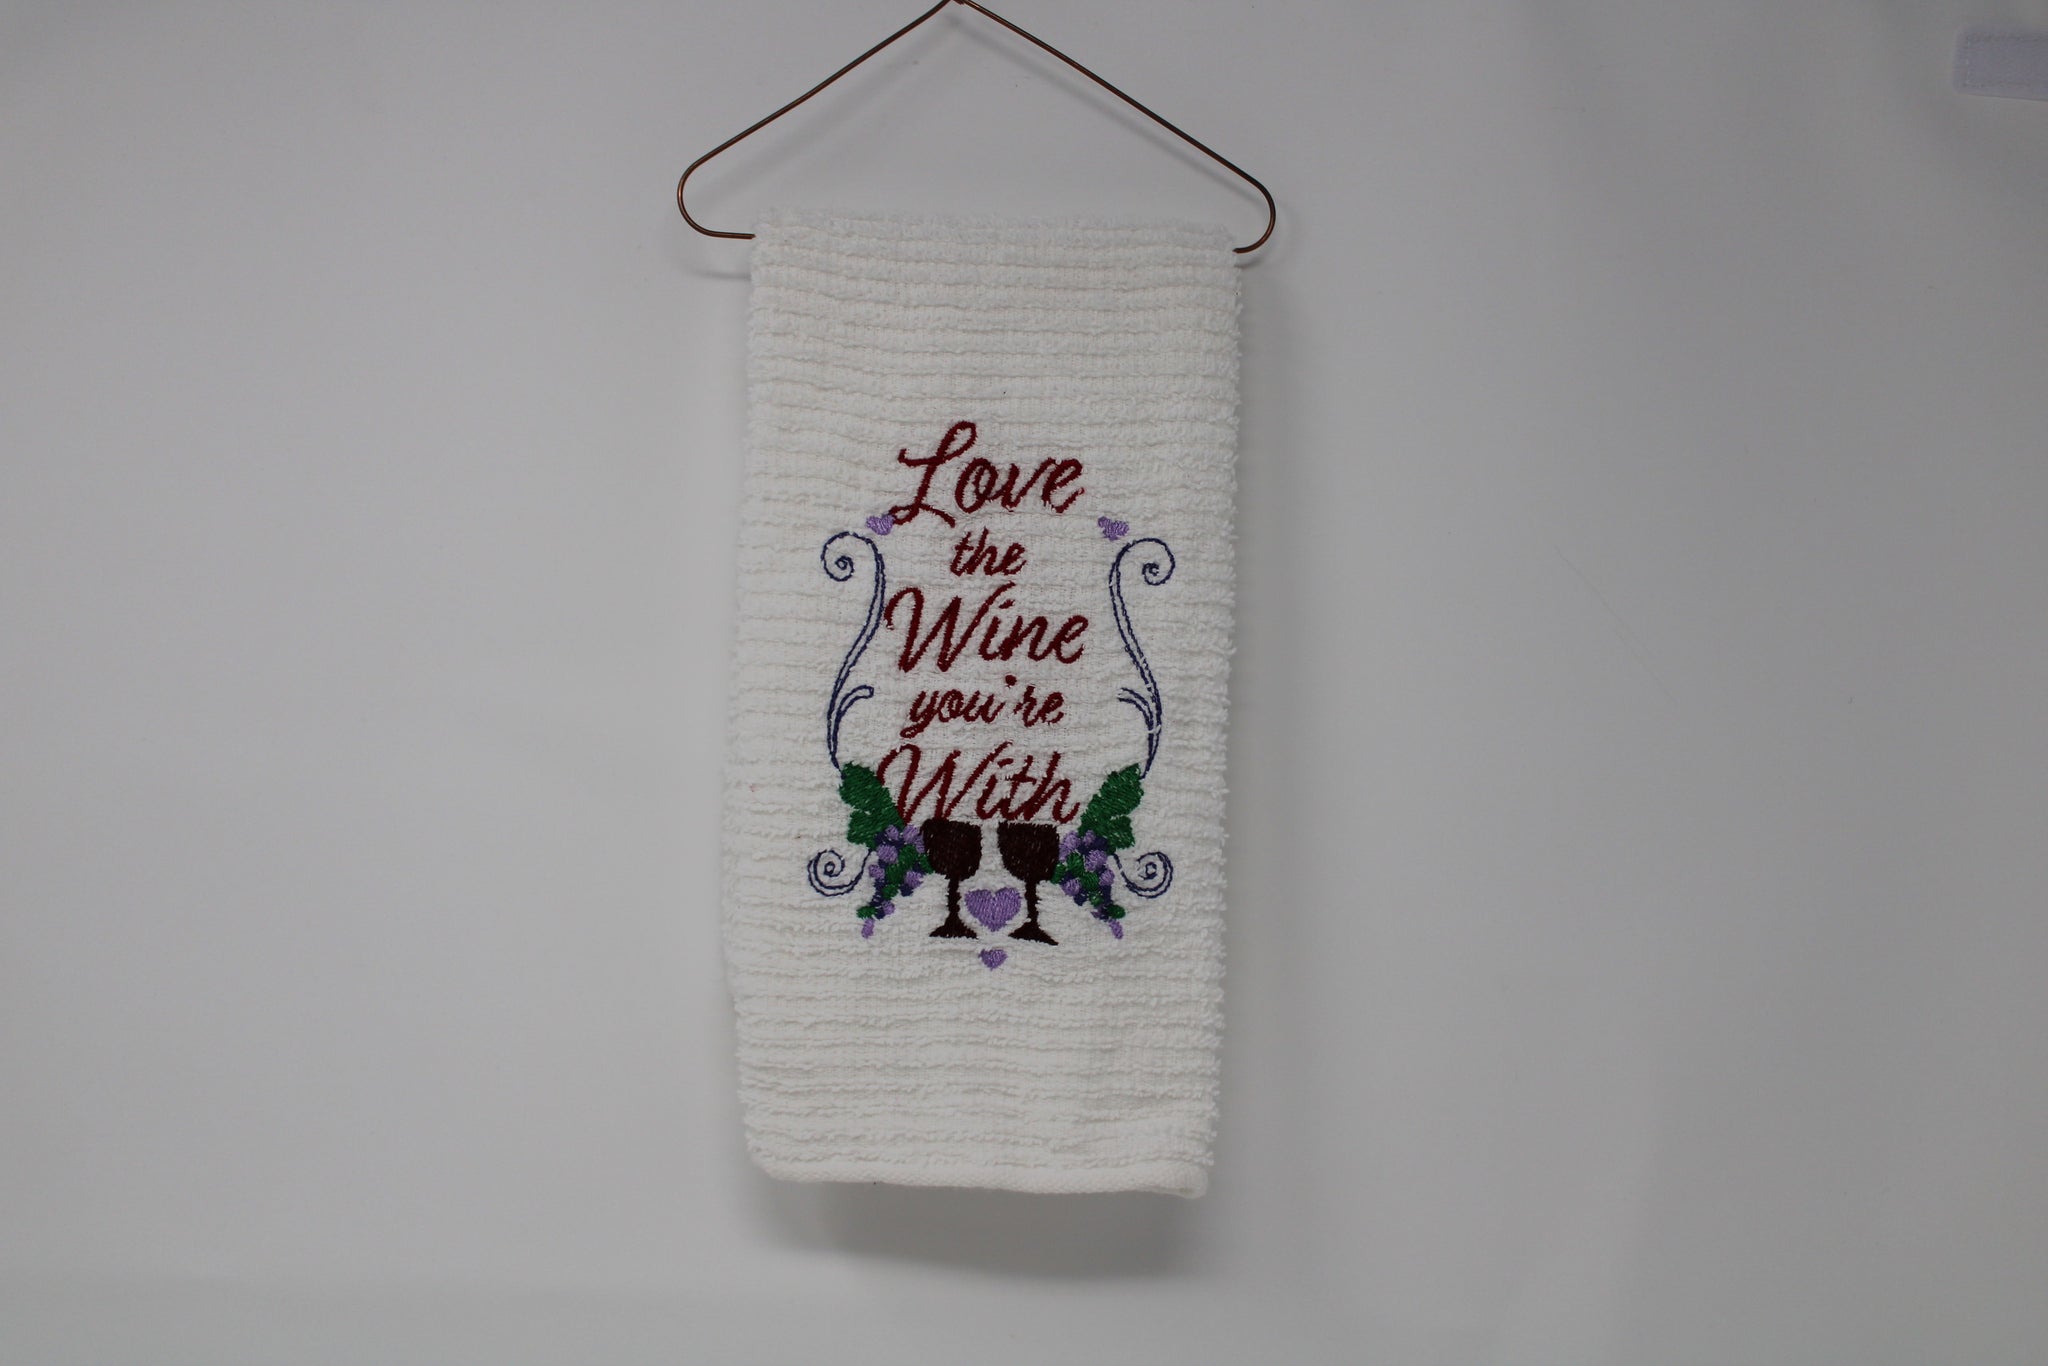 Embroidered bar towels